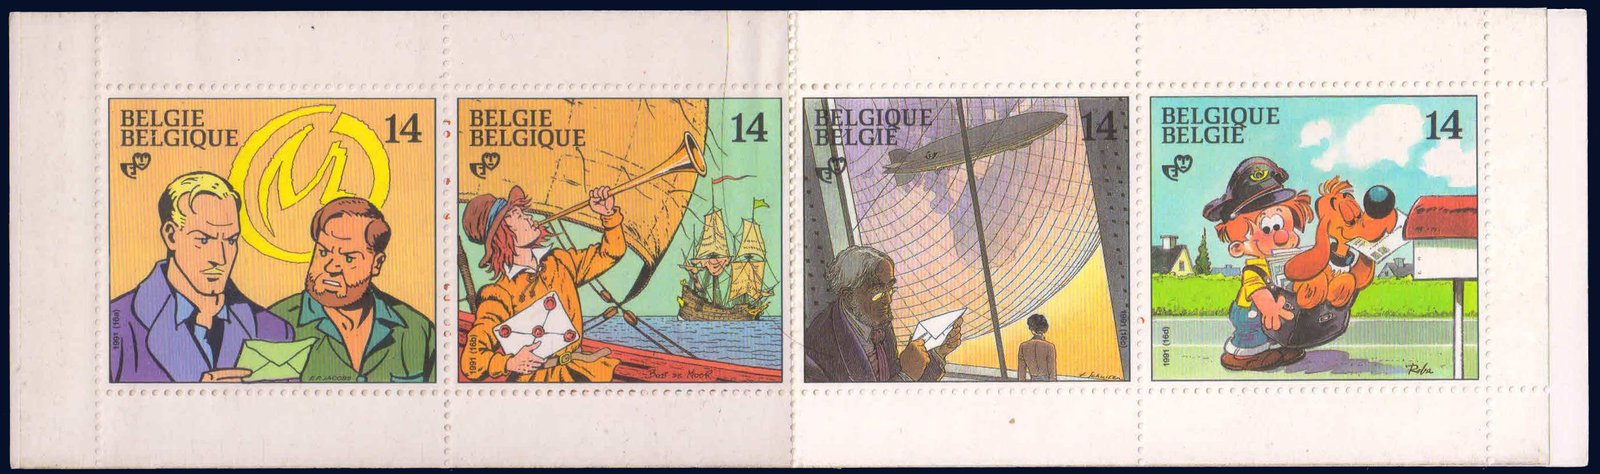 BELGIUM 1991-Comic Strips, The Yellow Mark, The Ill Fated Voyage, Cities of the Fantastic, Boule & Bill, Strip of 4, MNH, S.G. 3090-3093-Cat � 10-